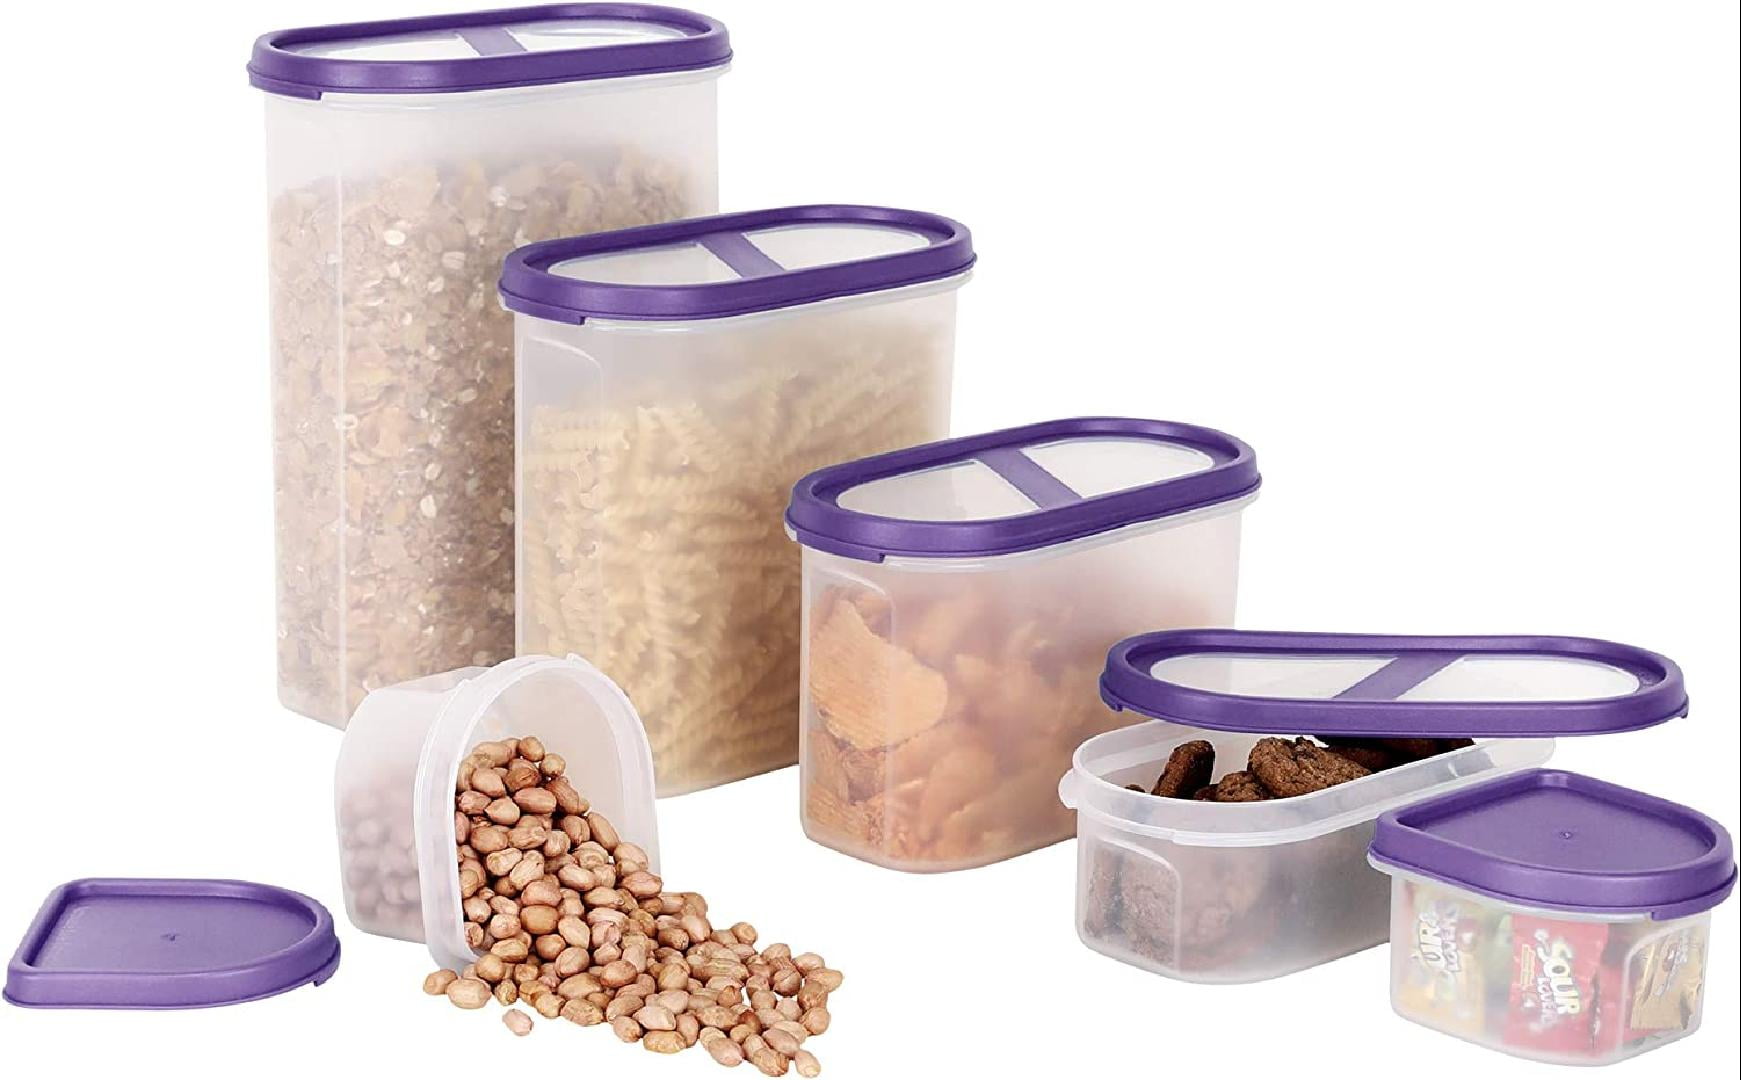 Ecowaare 7Pcs Airtight Food Storage Containers with Lids Set, BPA